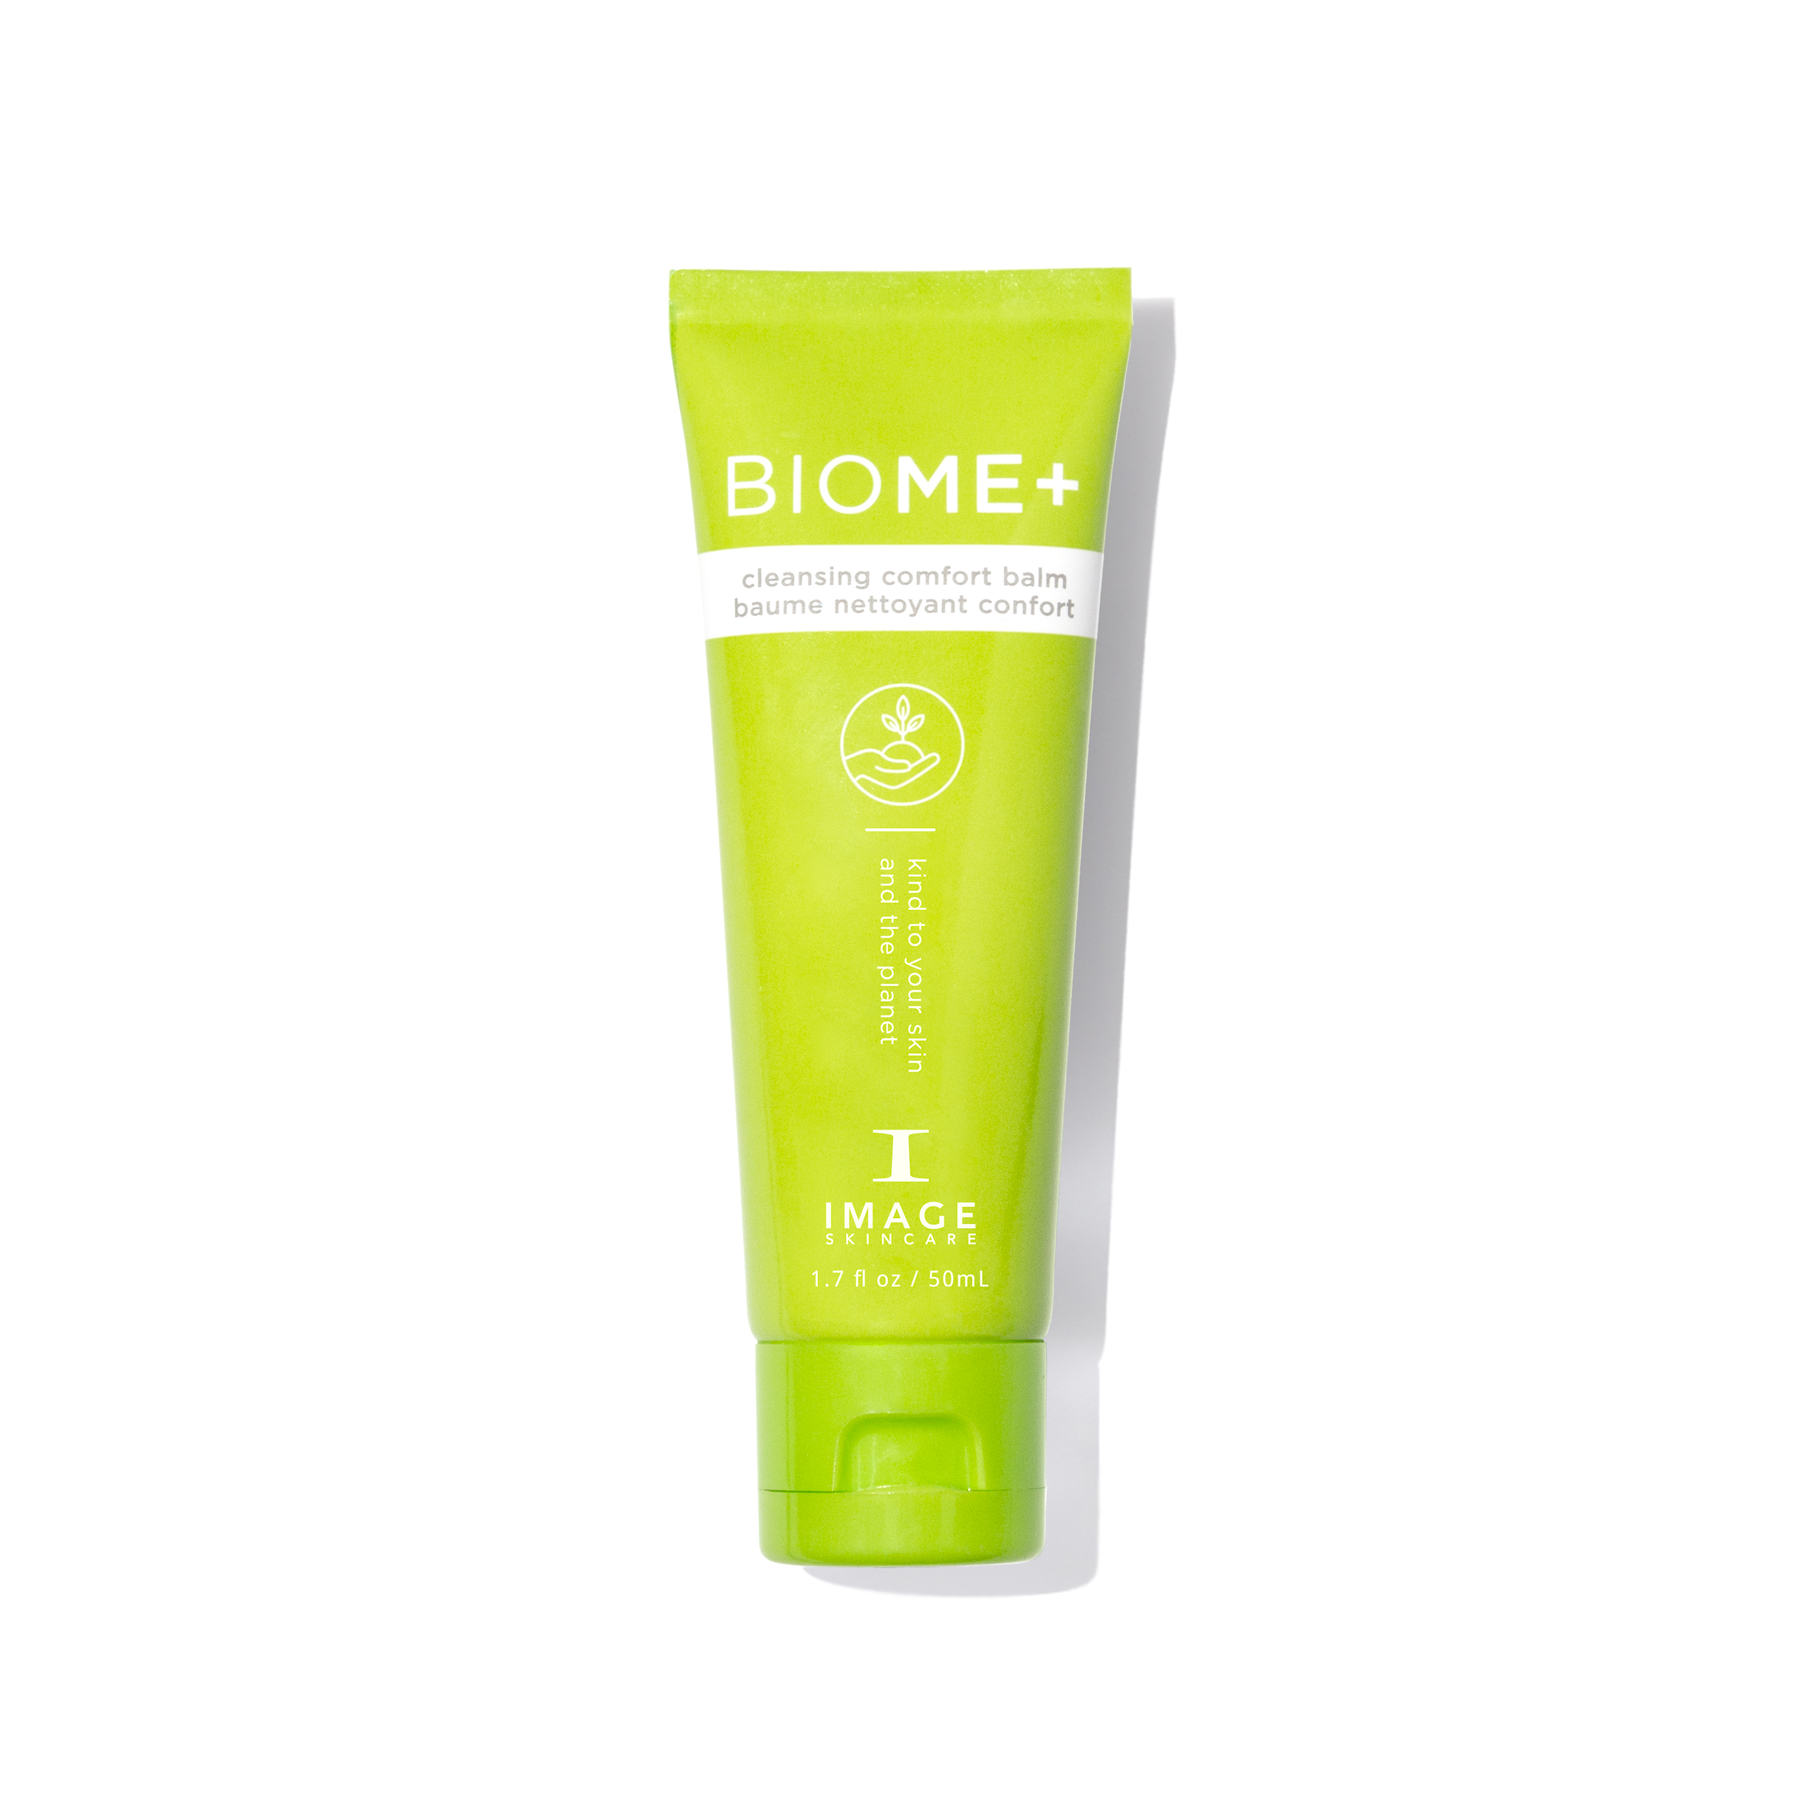 BIOME+™  cleansing comfort balm discovery-size